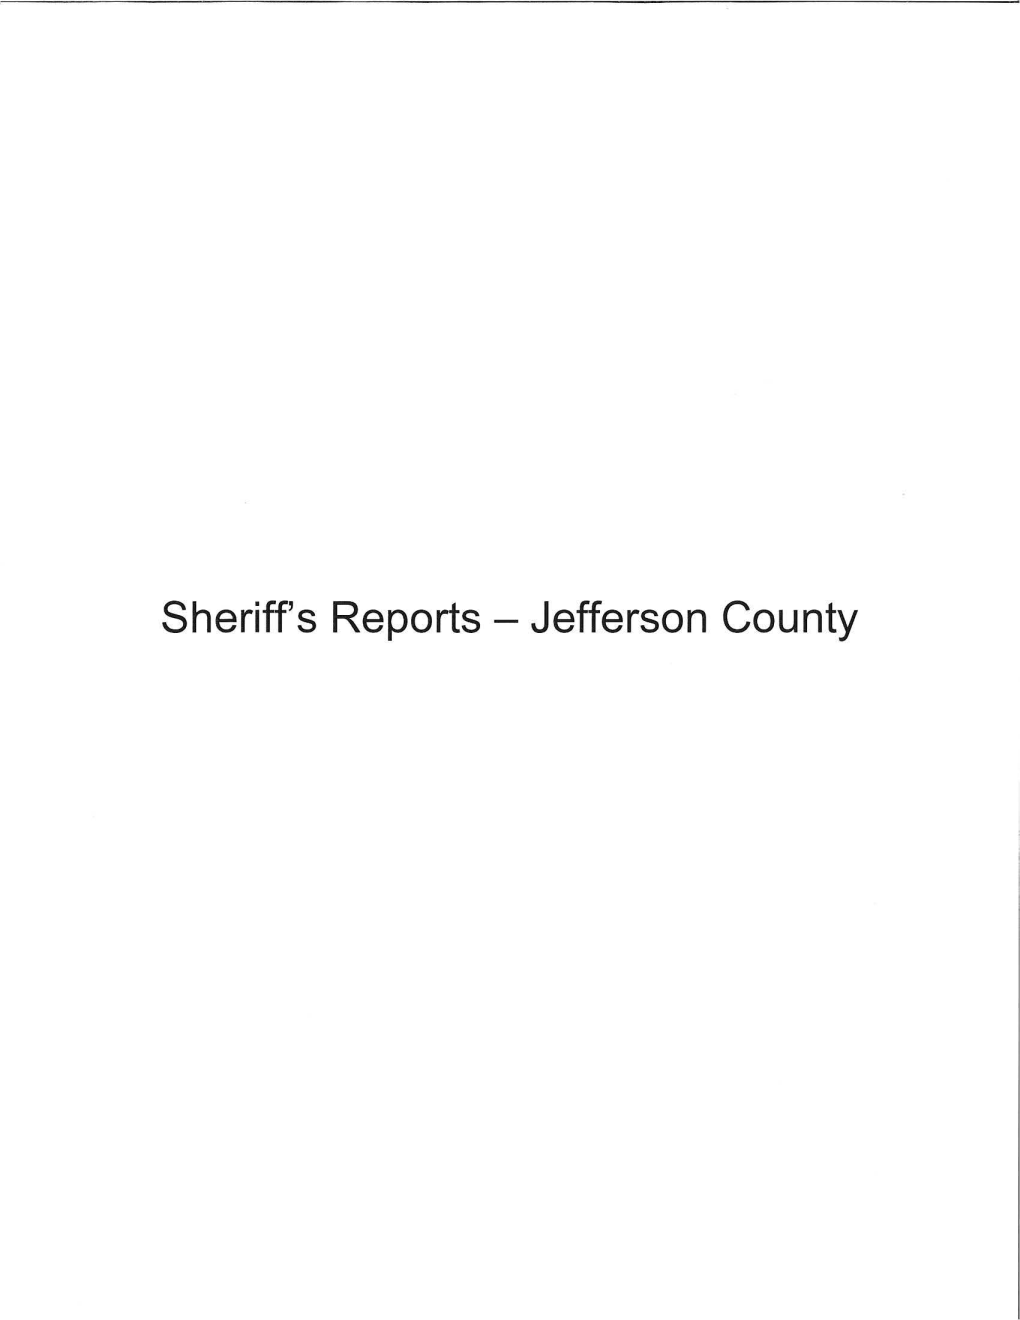 Sheriff's Reports- Jefferson County SHERIFF's OFFICE JEFFERSON COUNTY GOLDEN, COLORAOO